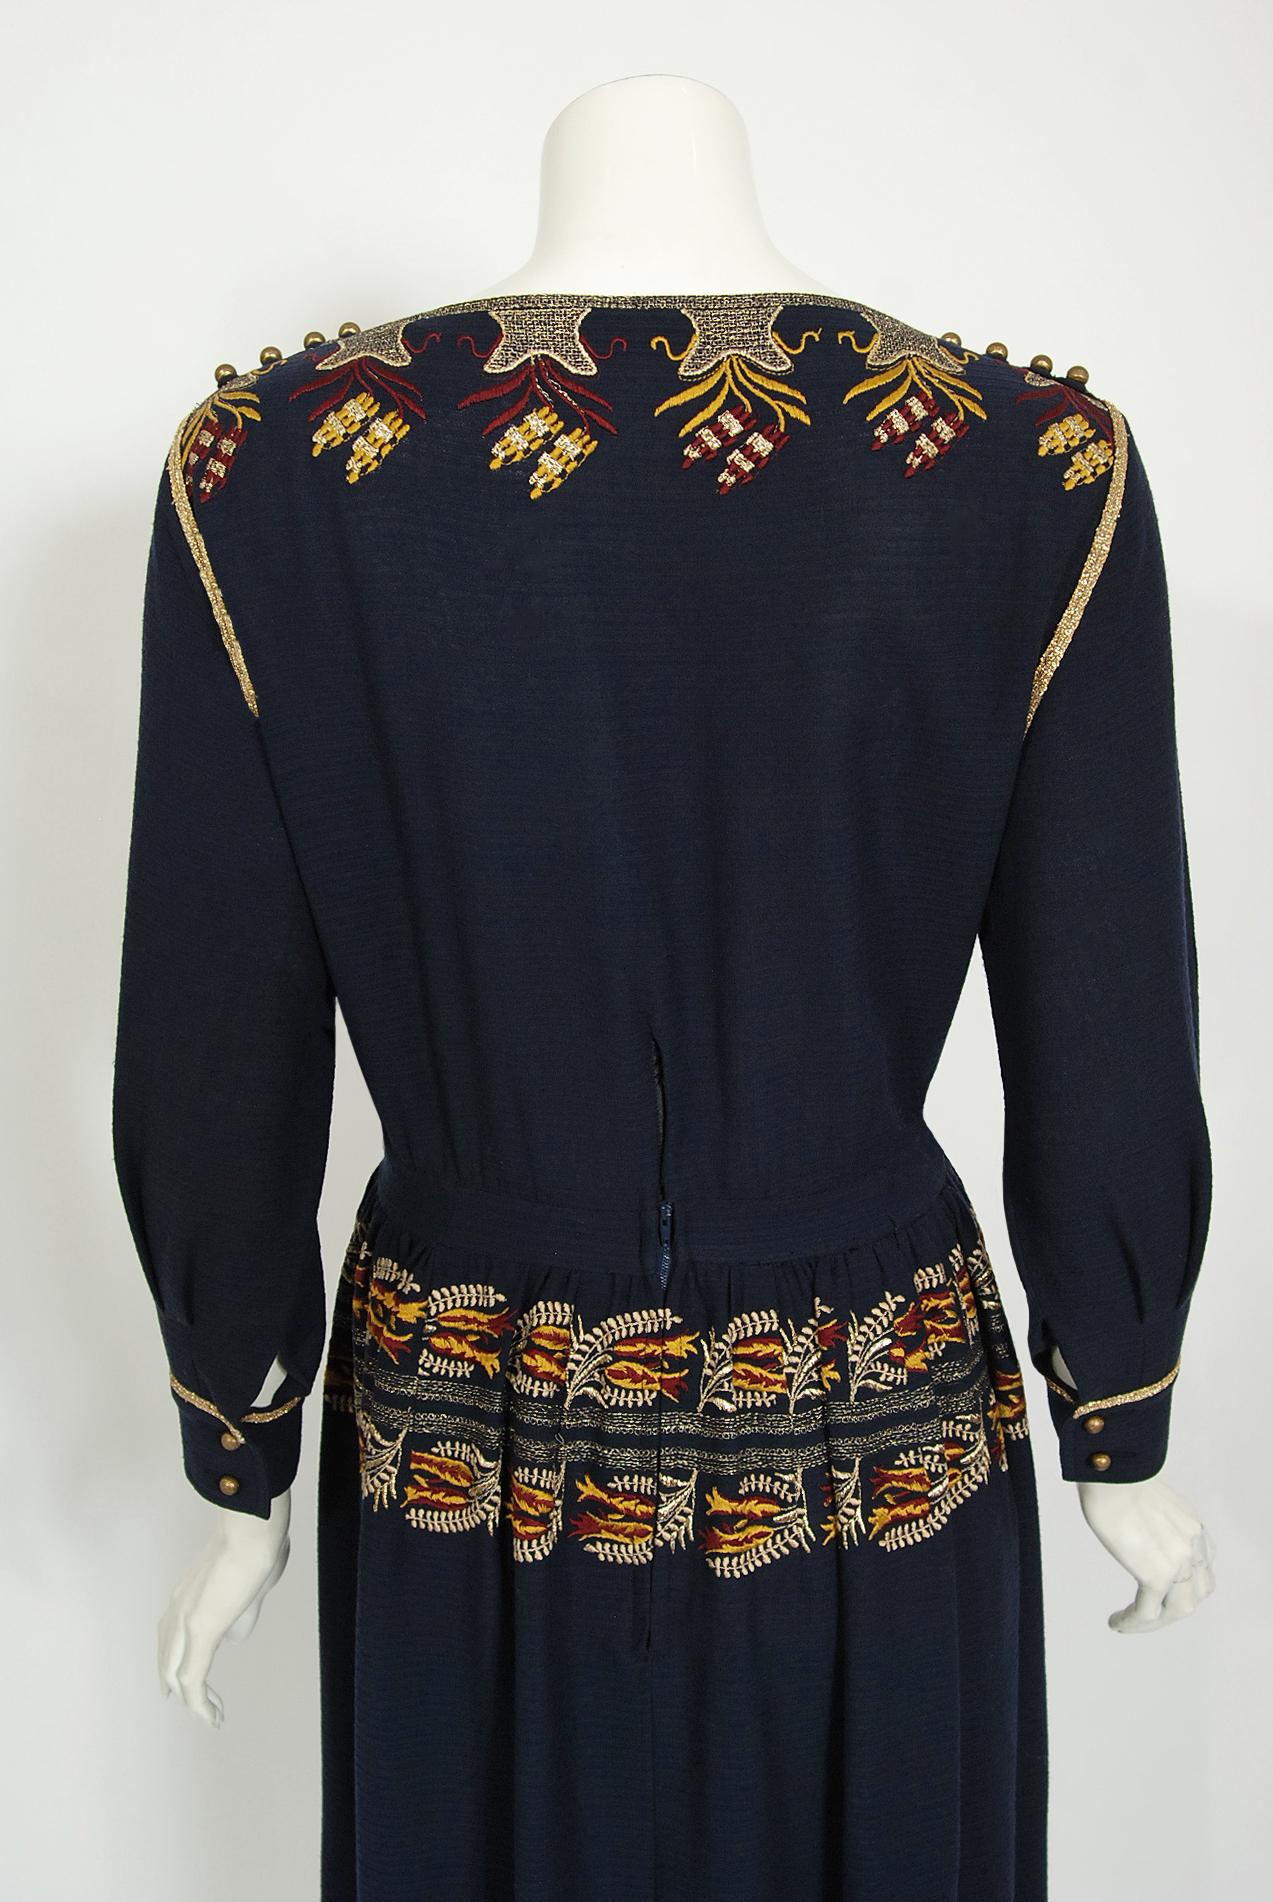 Vintage 1979 Karl Lagerfeld for Chloe Navy Blue Metallic Embroidered Knit Dress 7